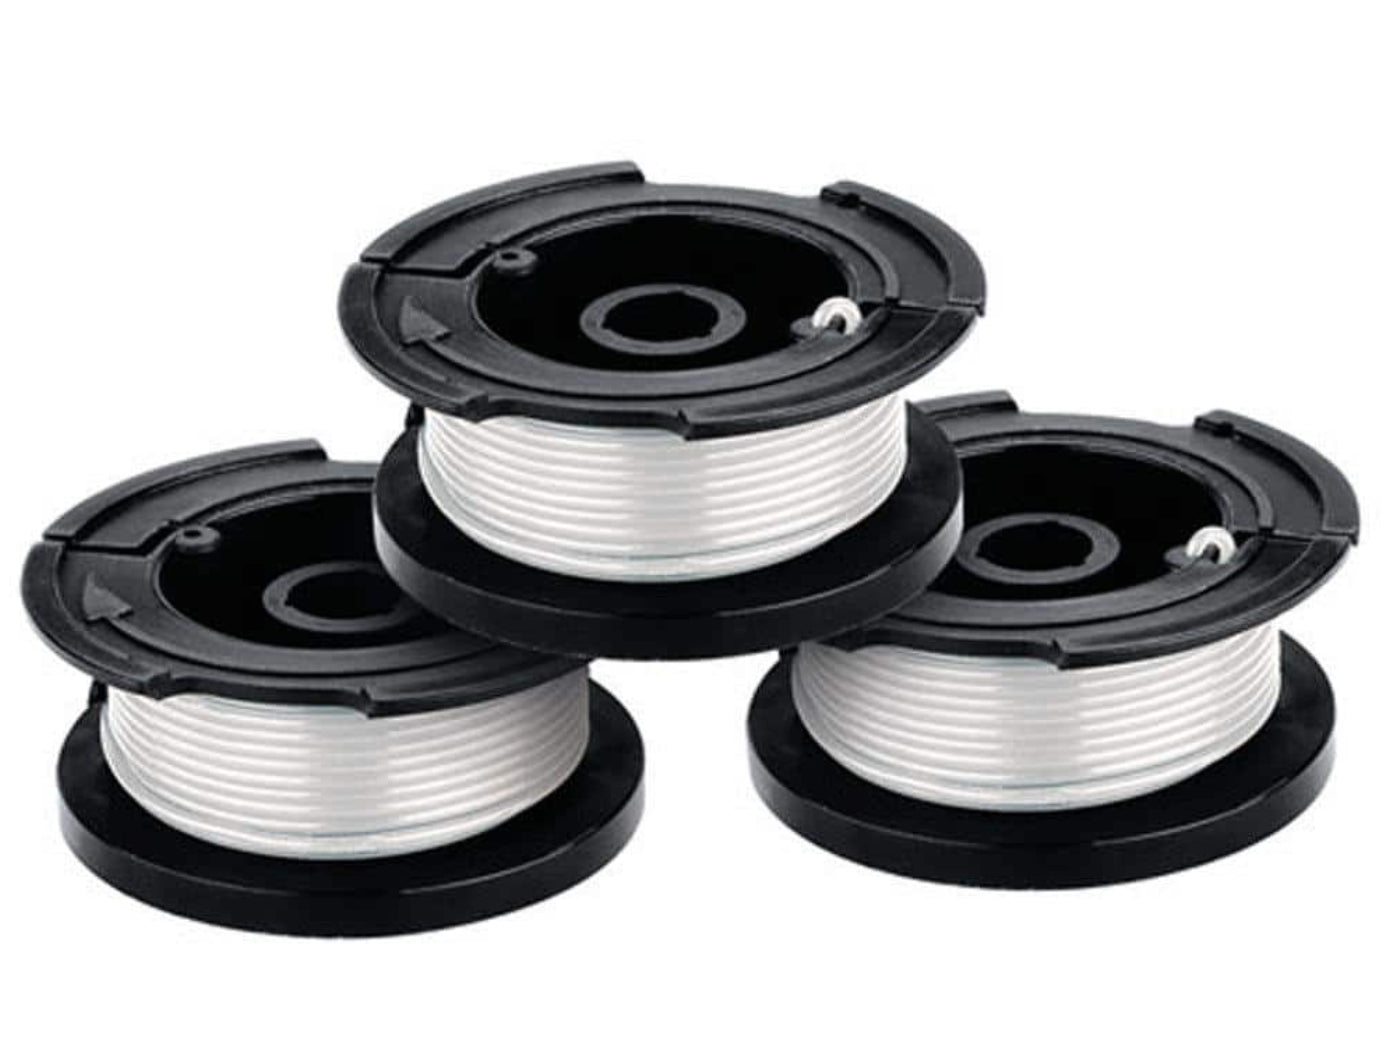 BLACK+DECKER 0.065 in. x 30 ft. Replacement Single Line Automatic Feed Spools AFS for Electric String Grass Trimmer/Edger (3-Pack)